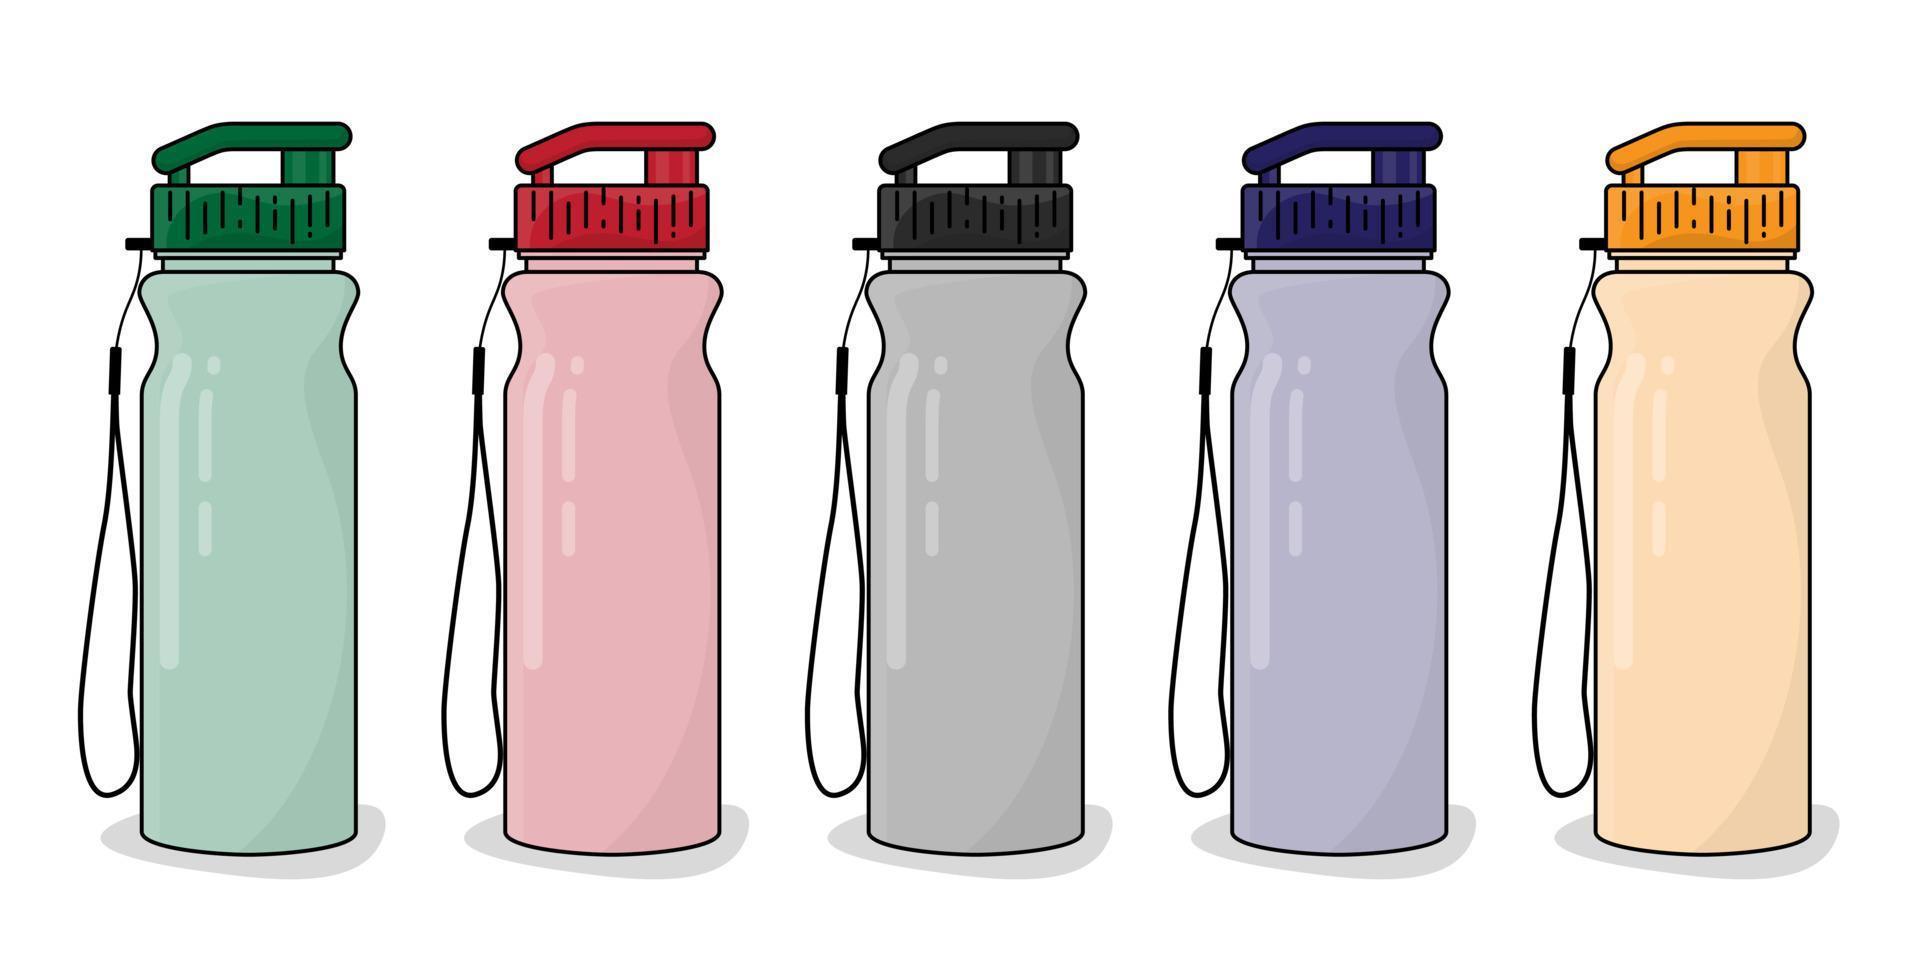 Plastic bottle or vacuum flask with cap and rope template for packaging design vector